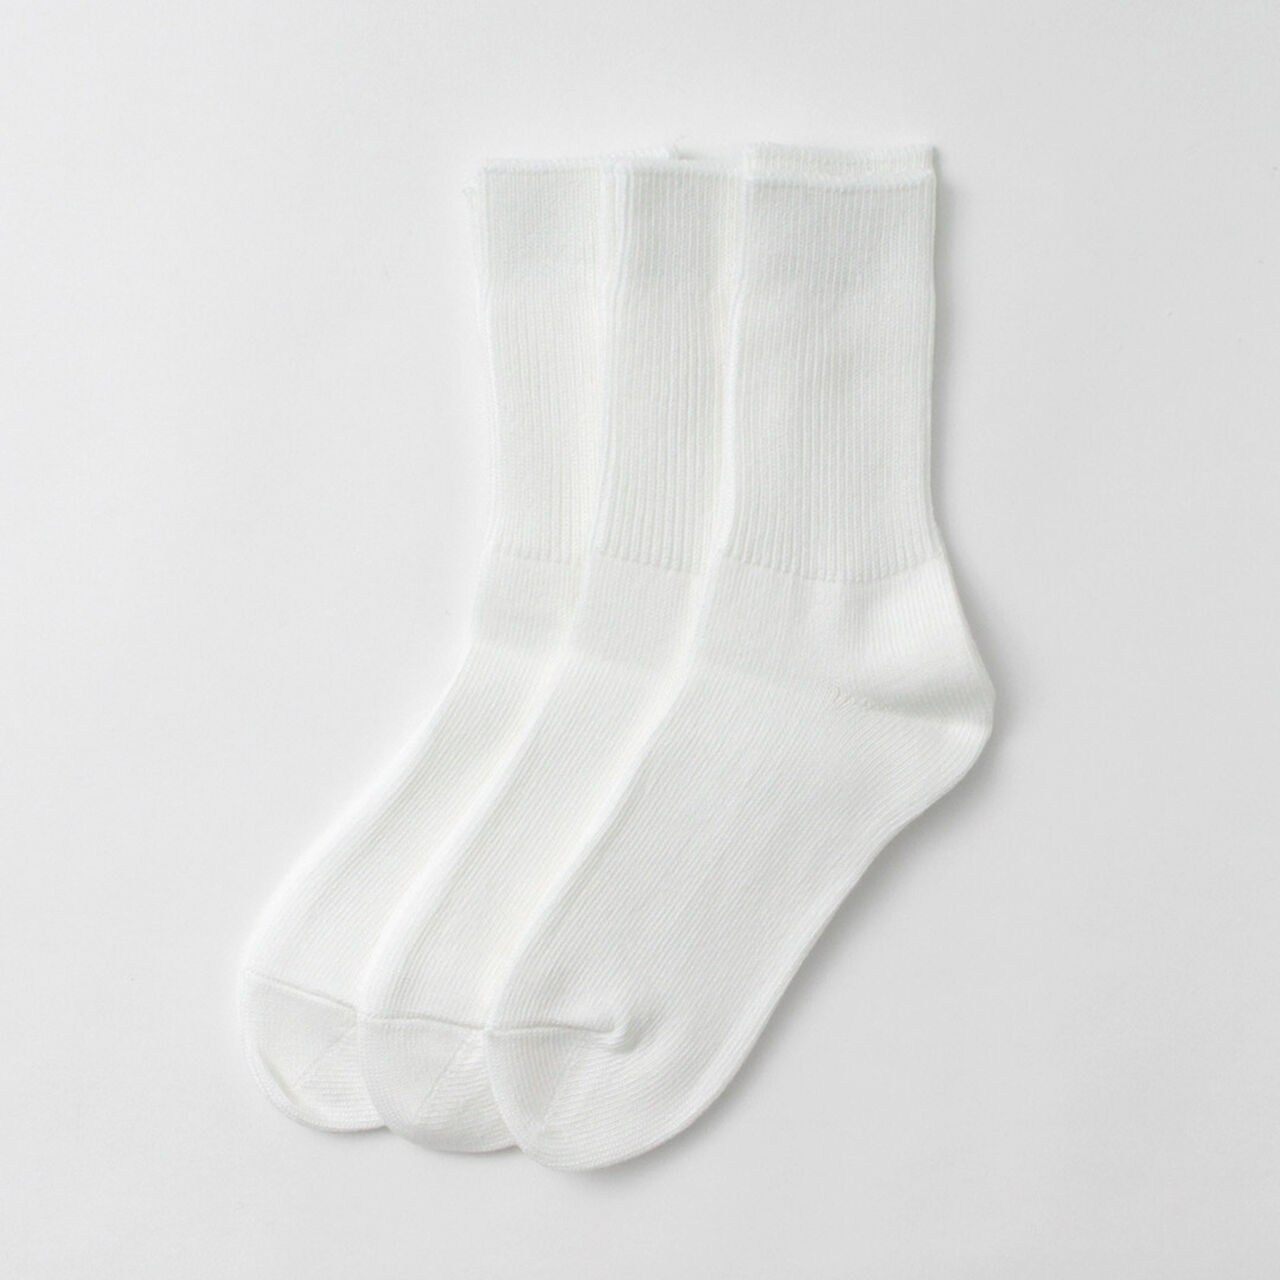 R1427 Organic Daily 3 Pack Ribbed Crew Socks,White, large image number 0